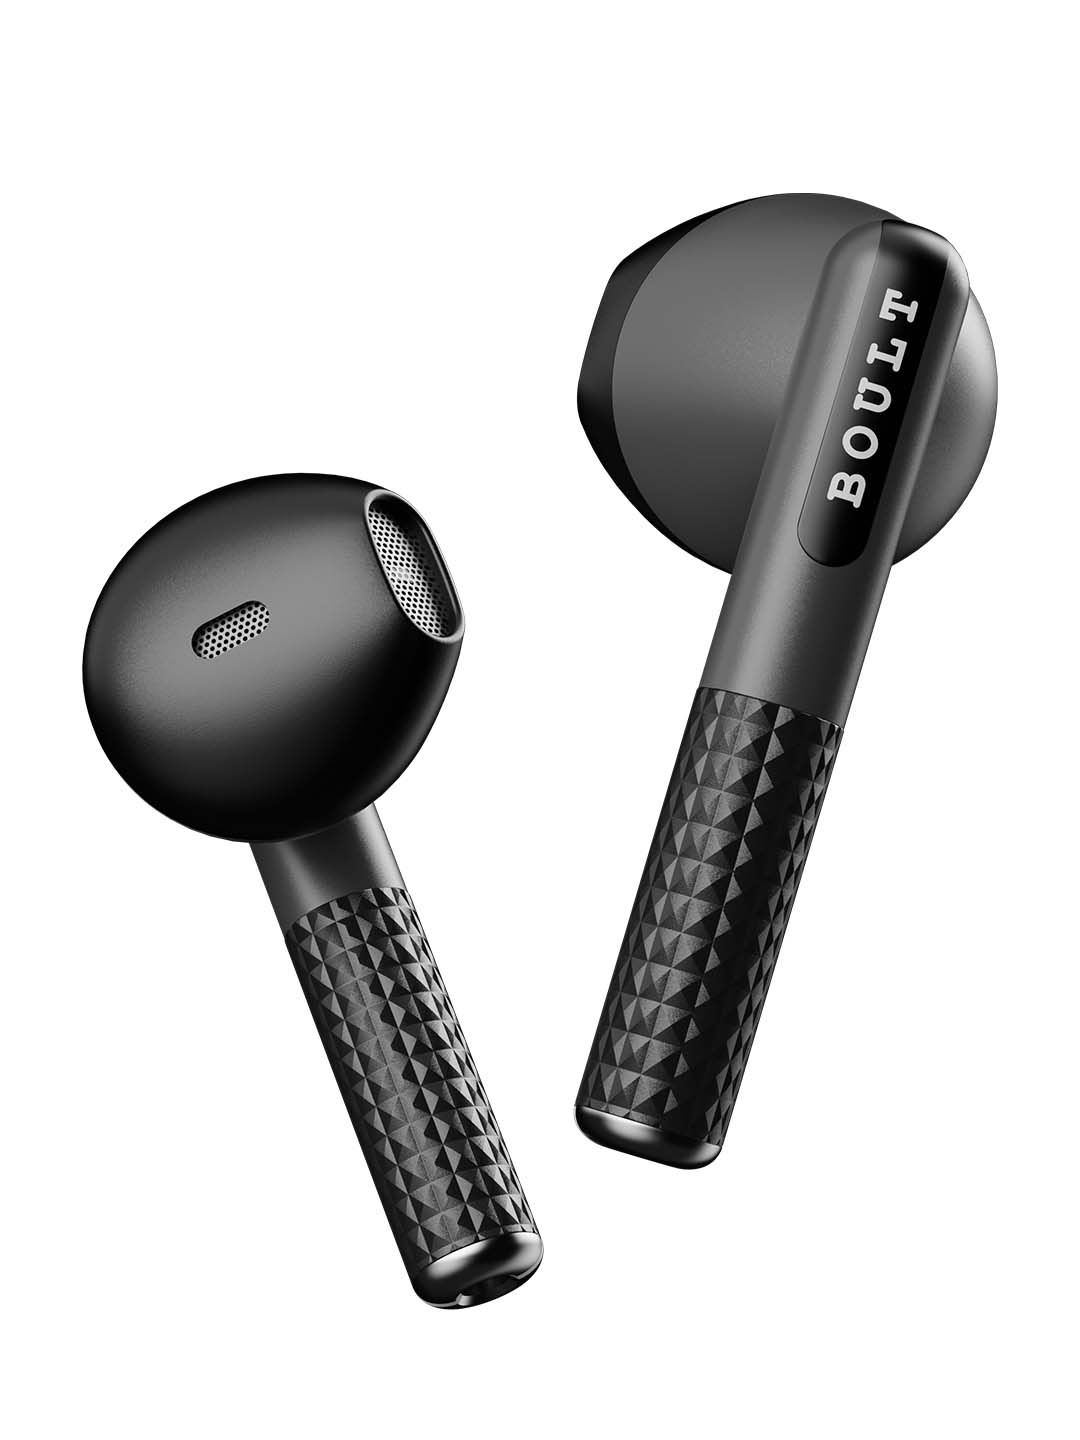 BOULT AUDIO AirBass X Pods Pro True Wireless Earbuds - Black Price in India